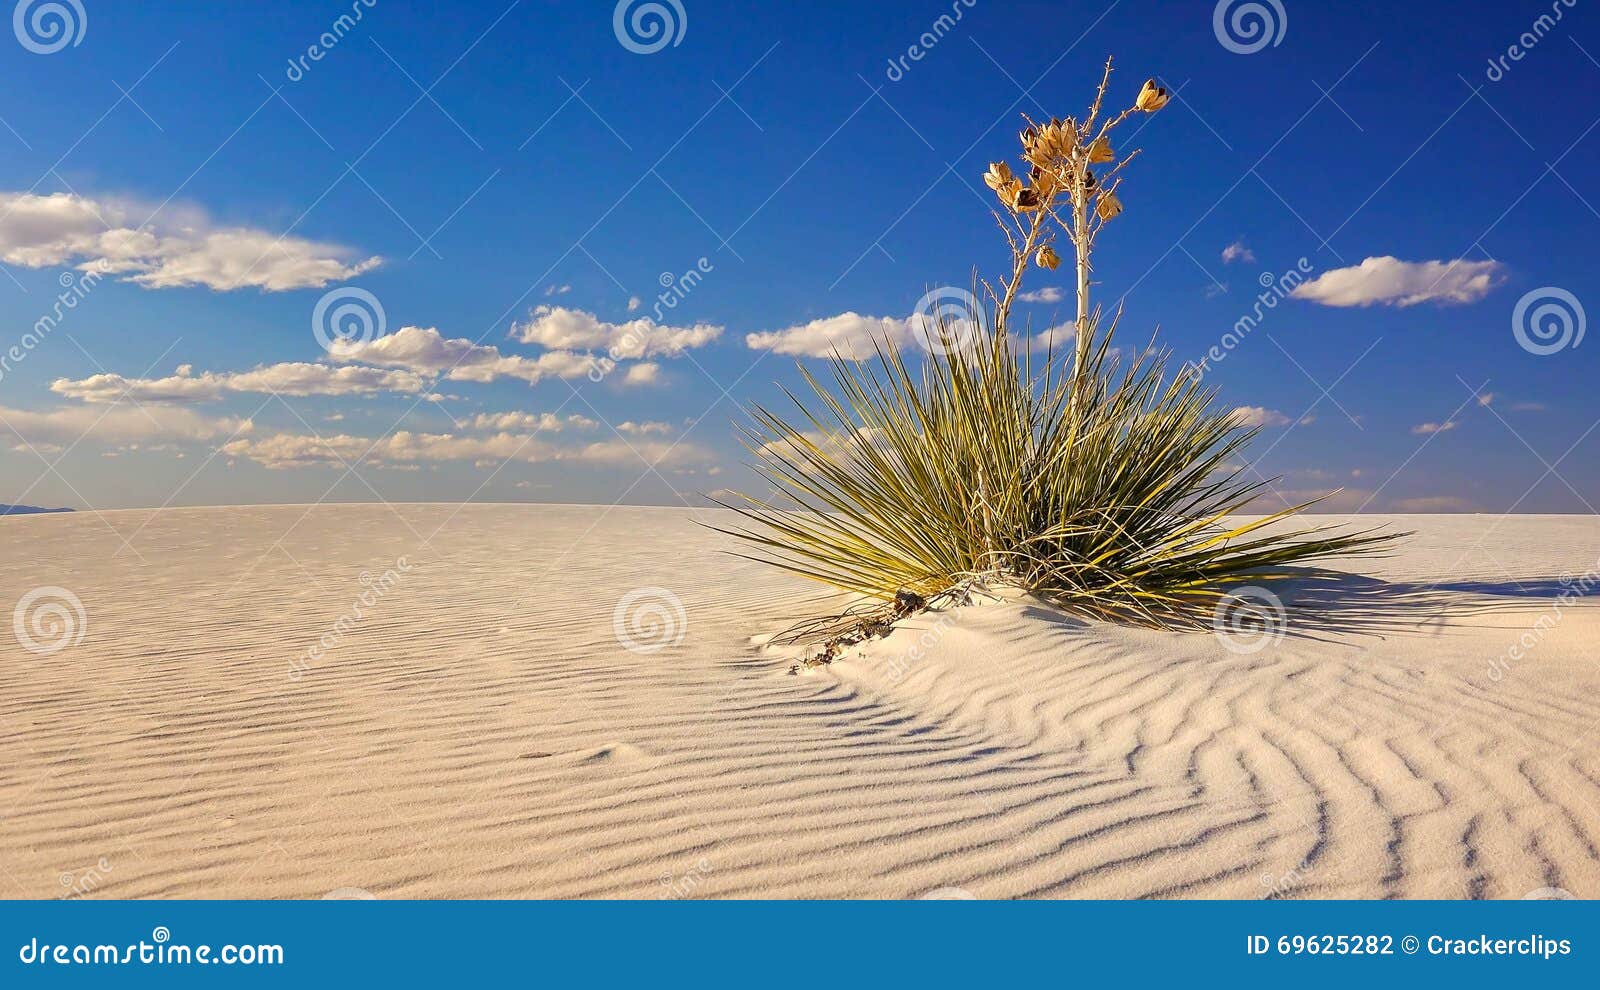 Yucca At White Sands National Monument 